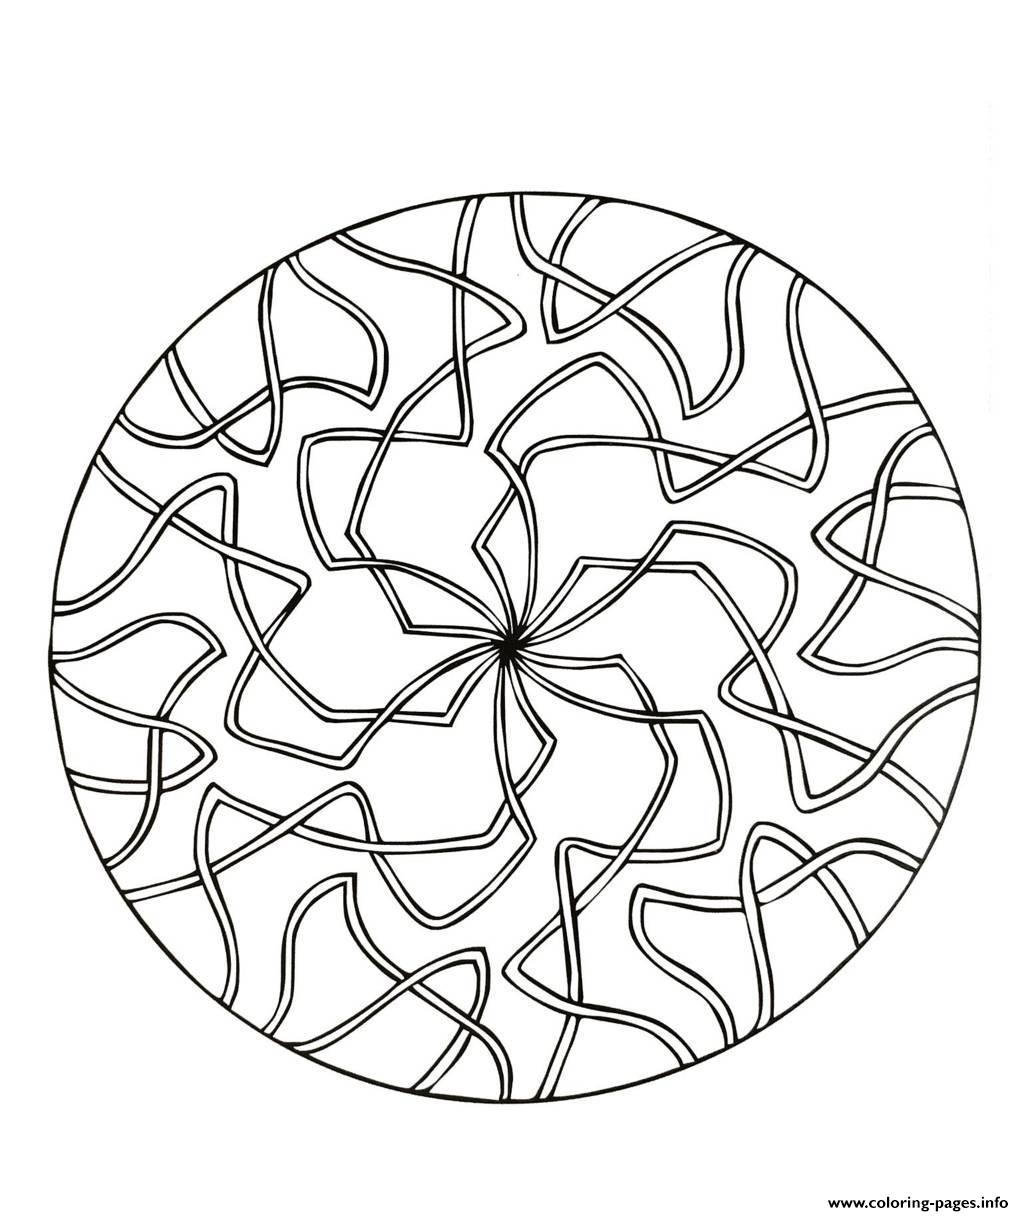 Mandalas To Download For Free 15  coloring